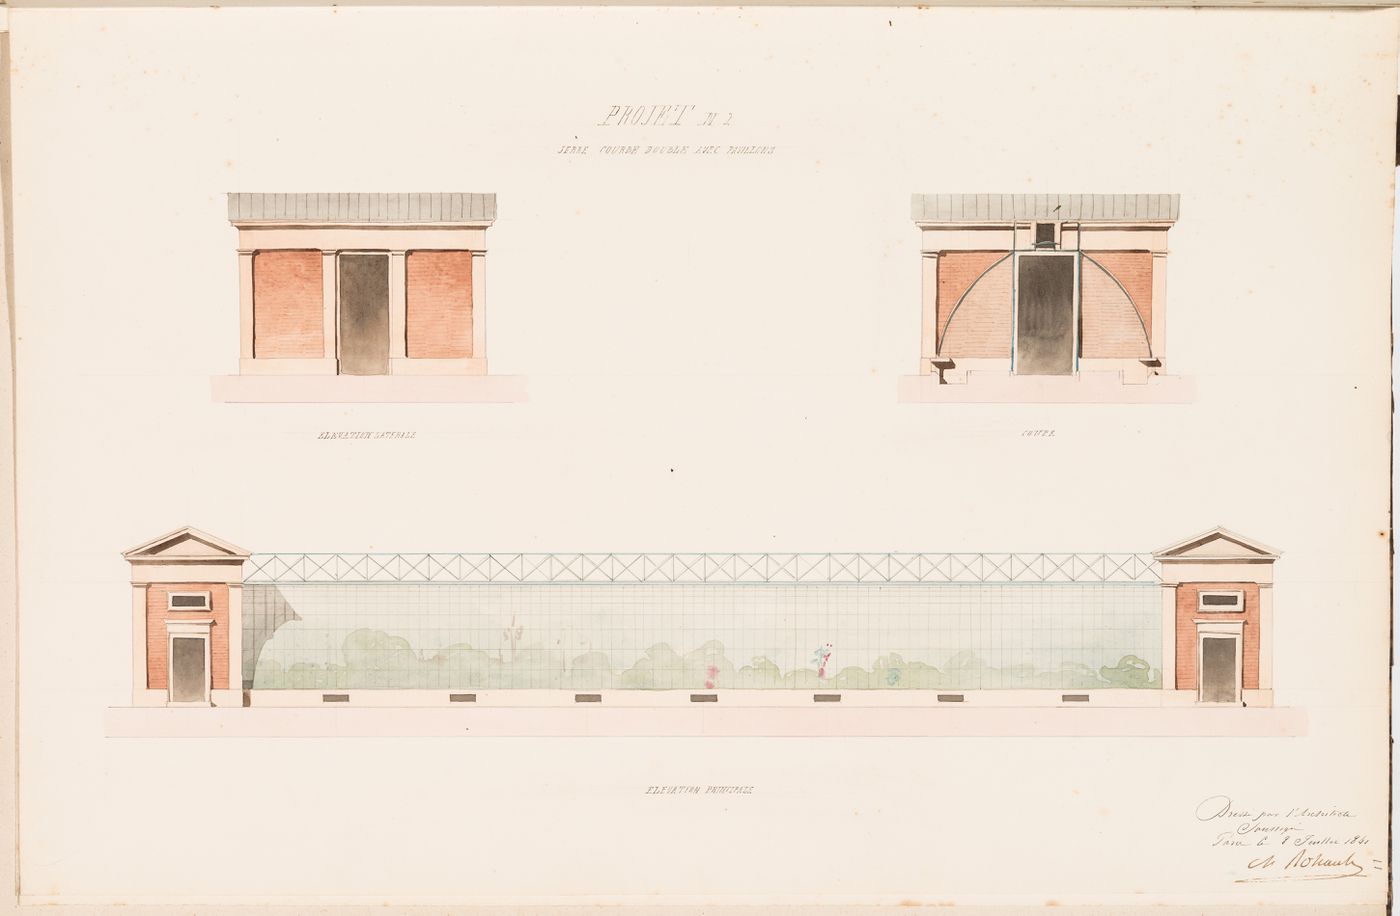 Principal and side elevations, and cross section for a "serre chaude" with two curved glass roofs and two pavilions for Monsieur Fauquet-Lemaitre